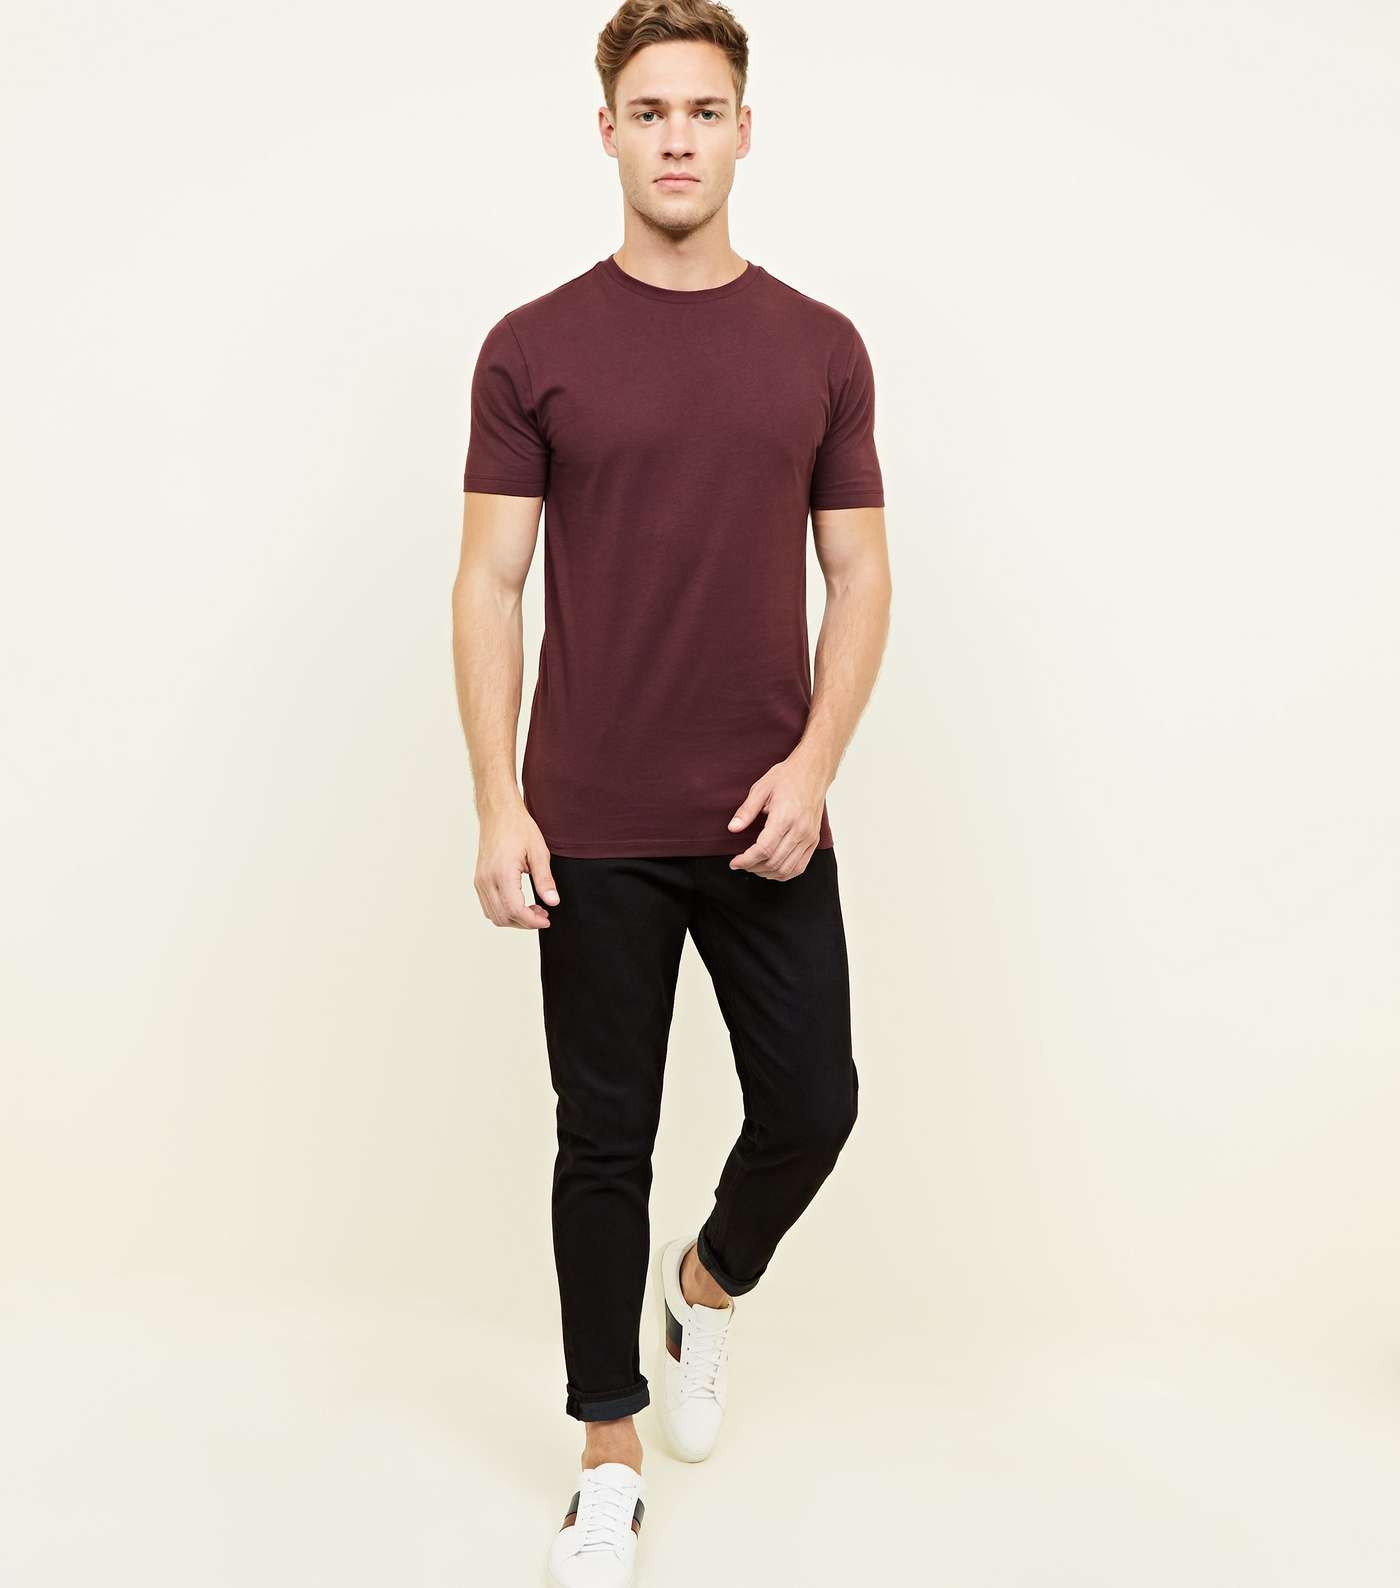 Burgundy Short Sleeve Muscle Fit T-Shirt Image 2